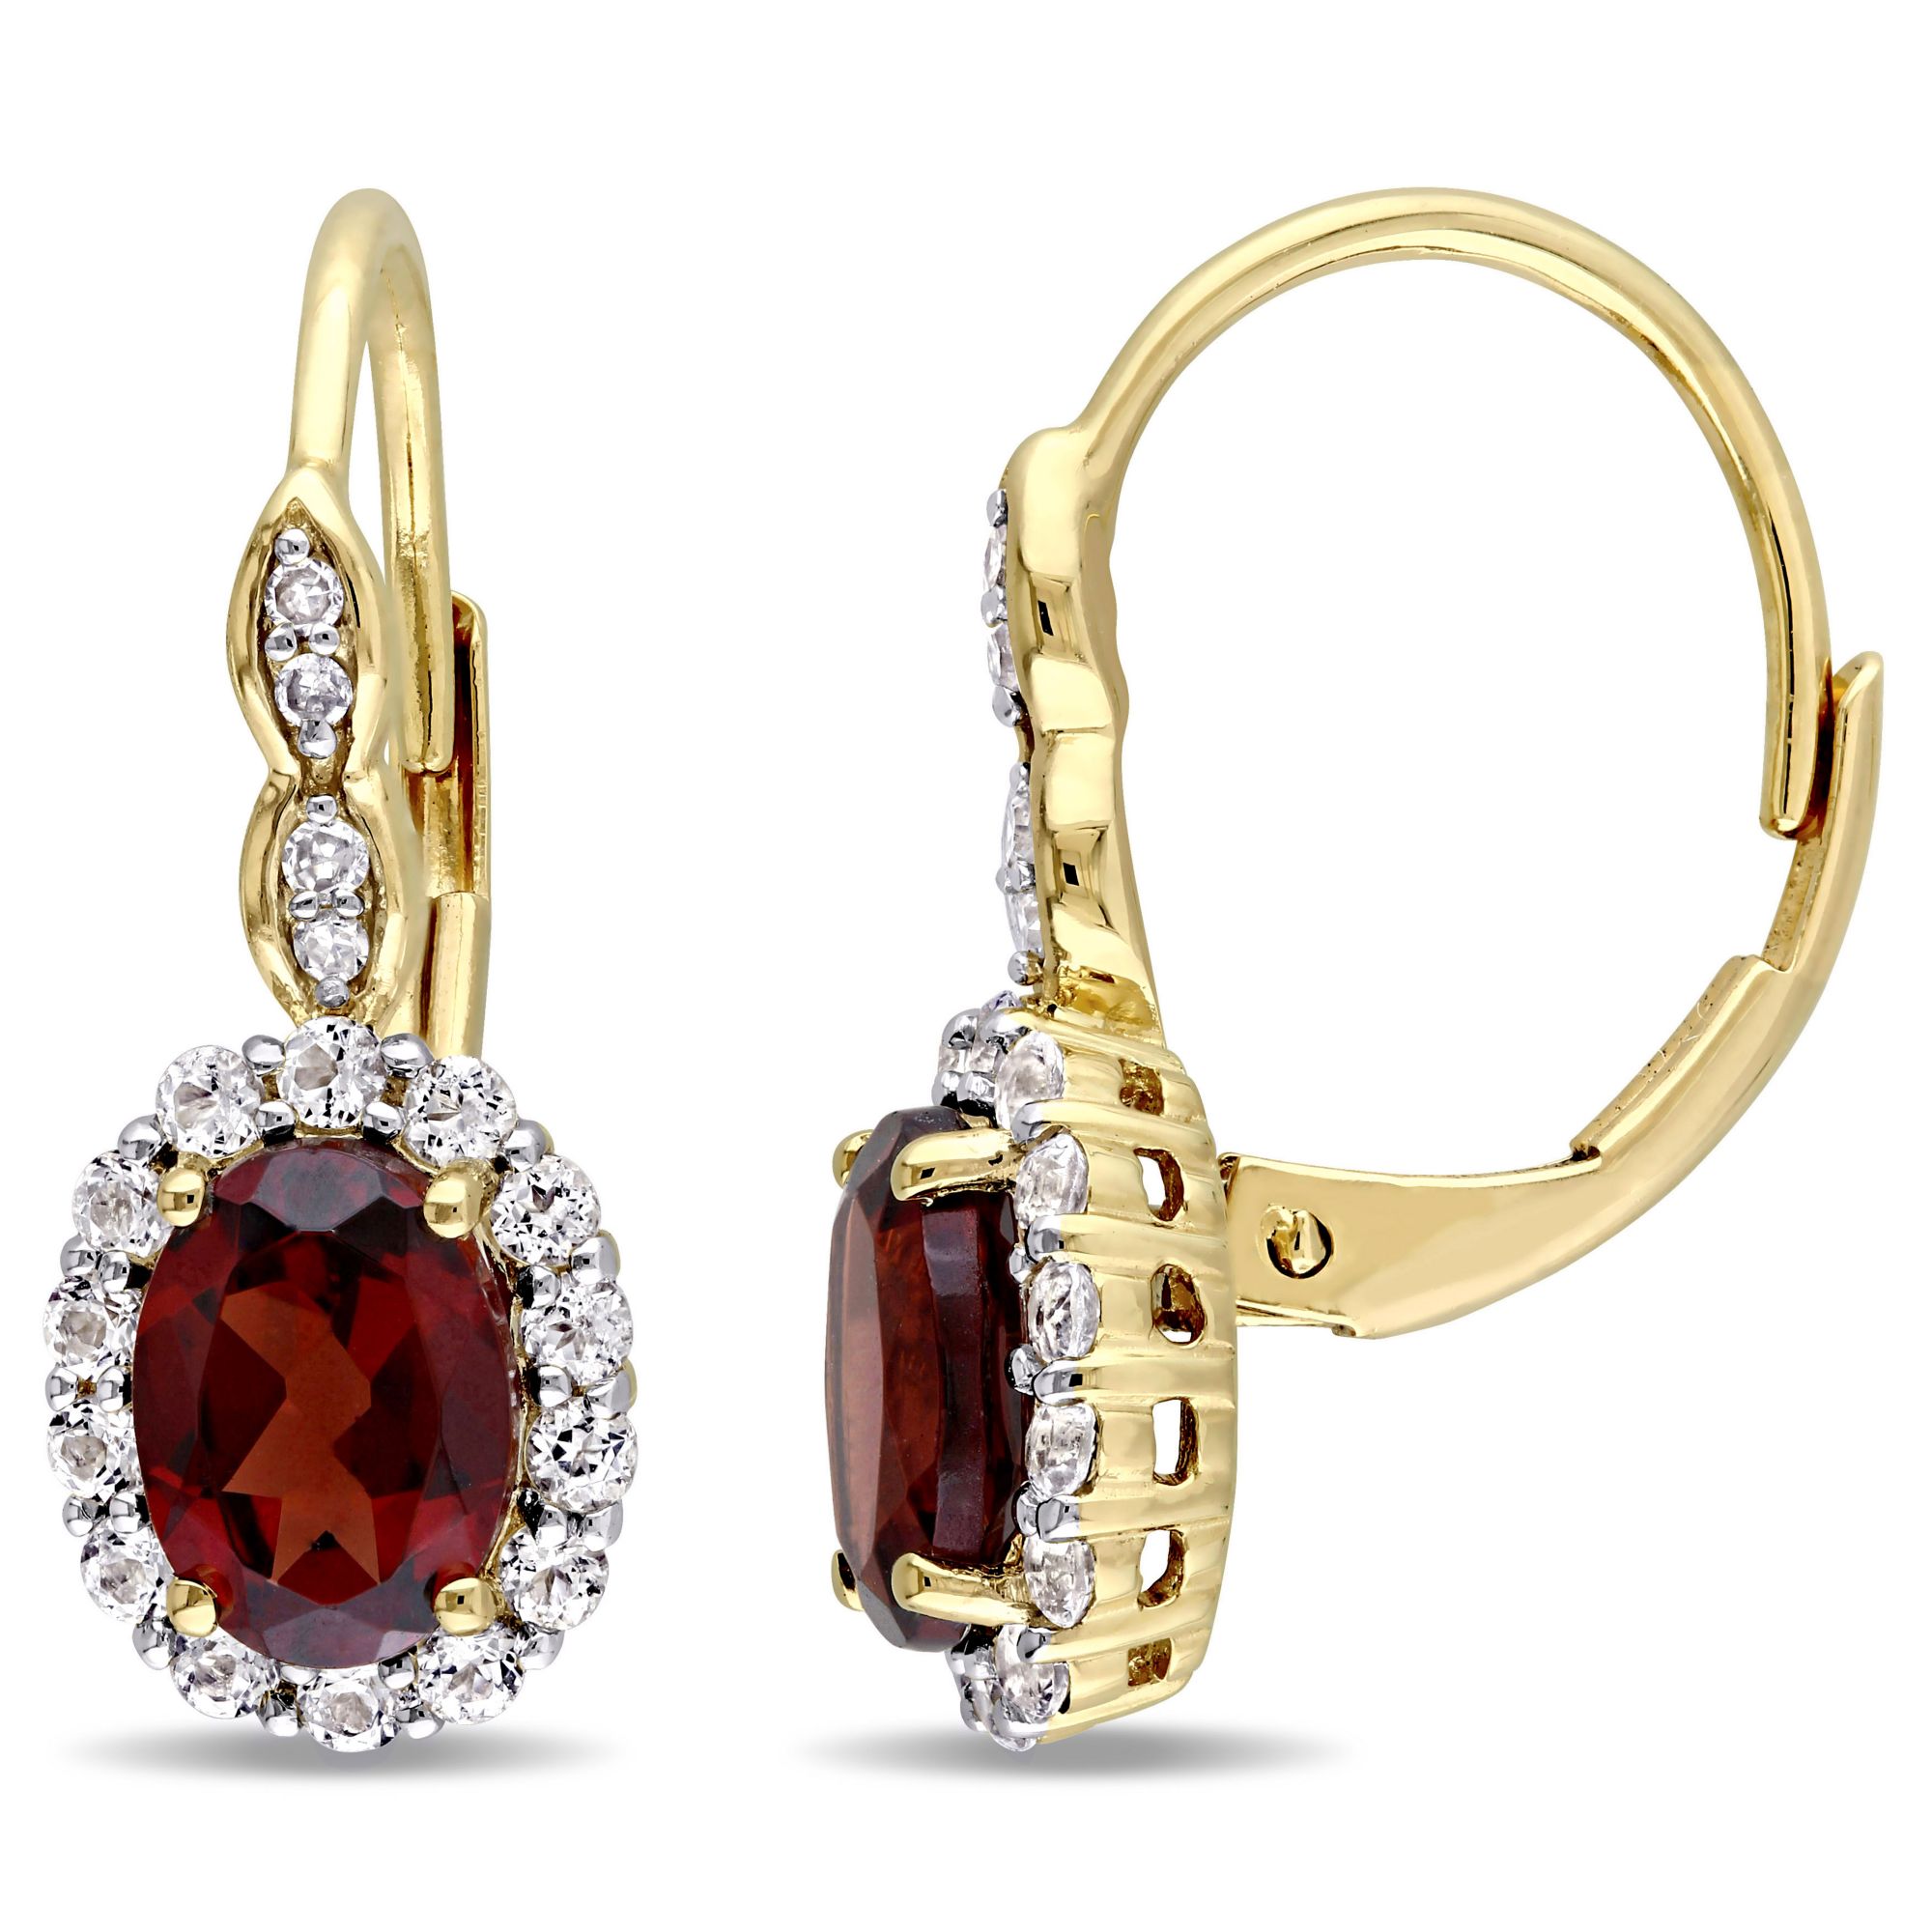 2 3/4 ct. TGW Oval Shape Garnet, White Topaz, and Diamond Accent Vintage Leverback Earrings in 14k Yellow Gold